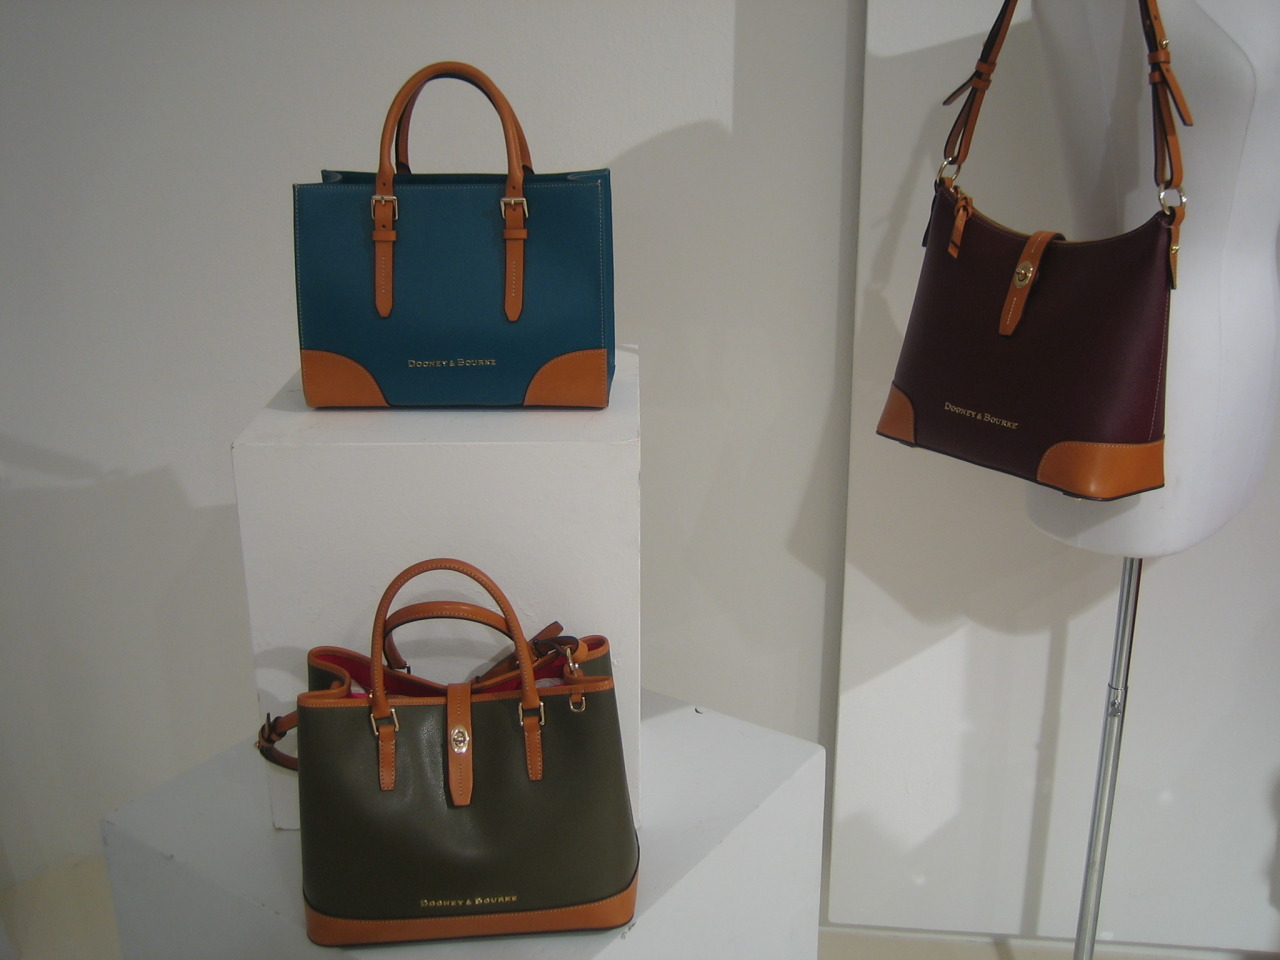 Dooney & Bourke Fall 2015 Preview